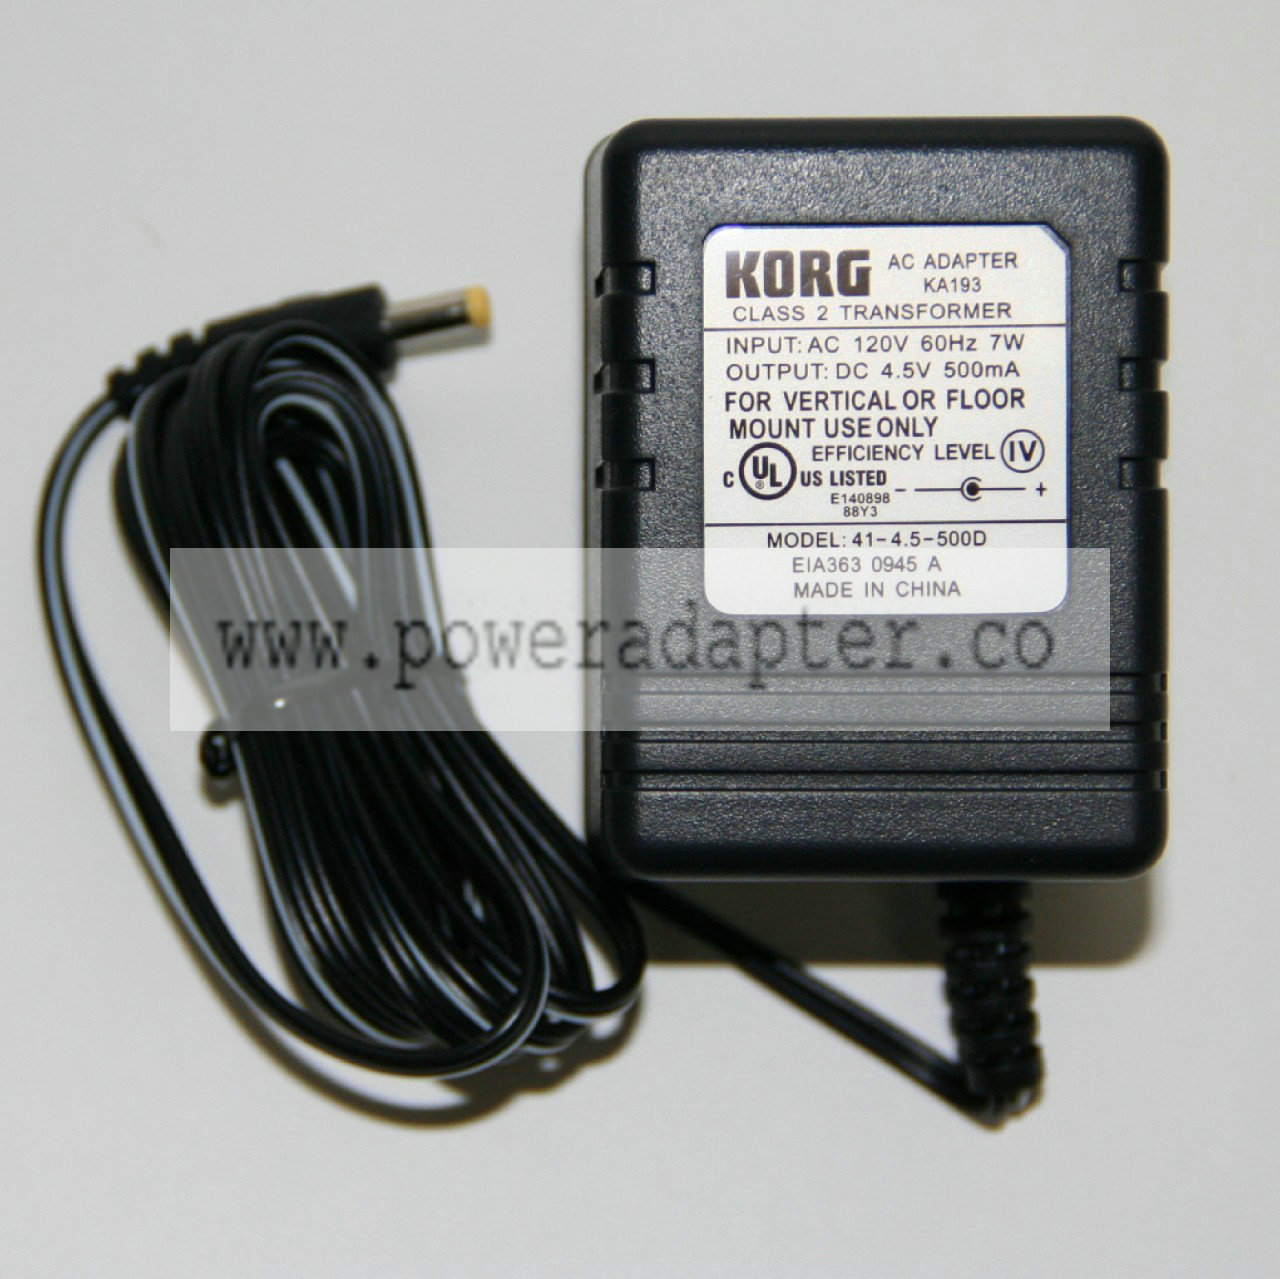 Korg KA193 / PXPS Replacement Power Supply for the Korg AX Series Pedals and more Product Description OEM Korg KA193